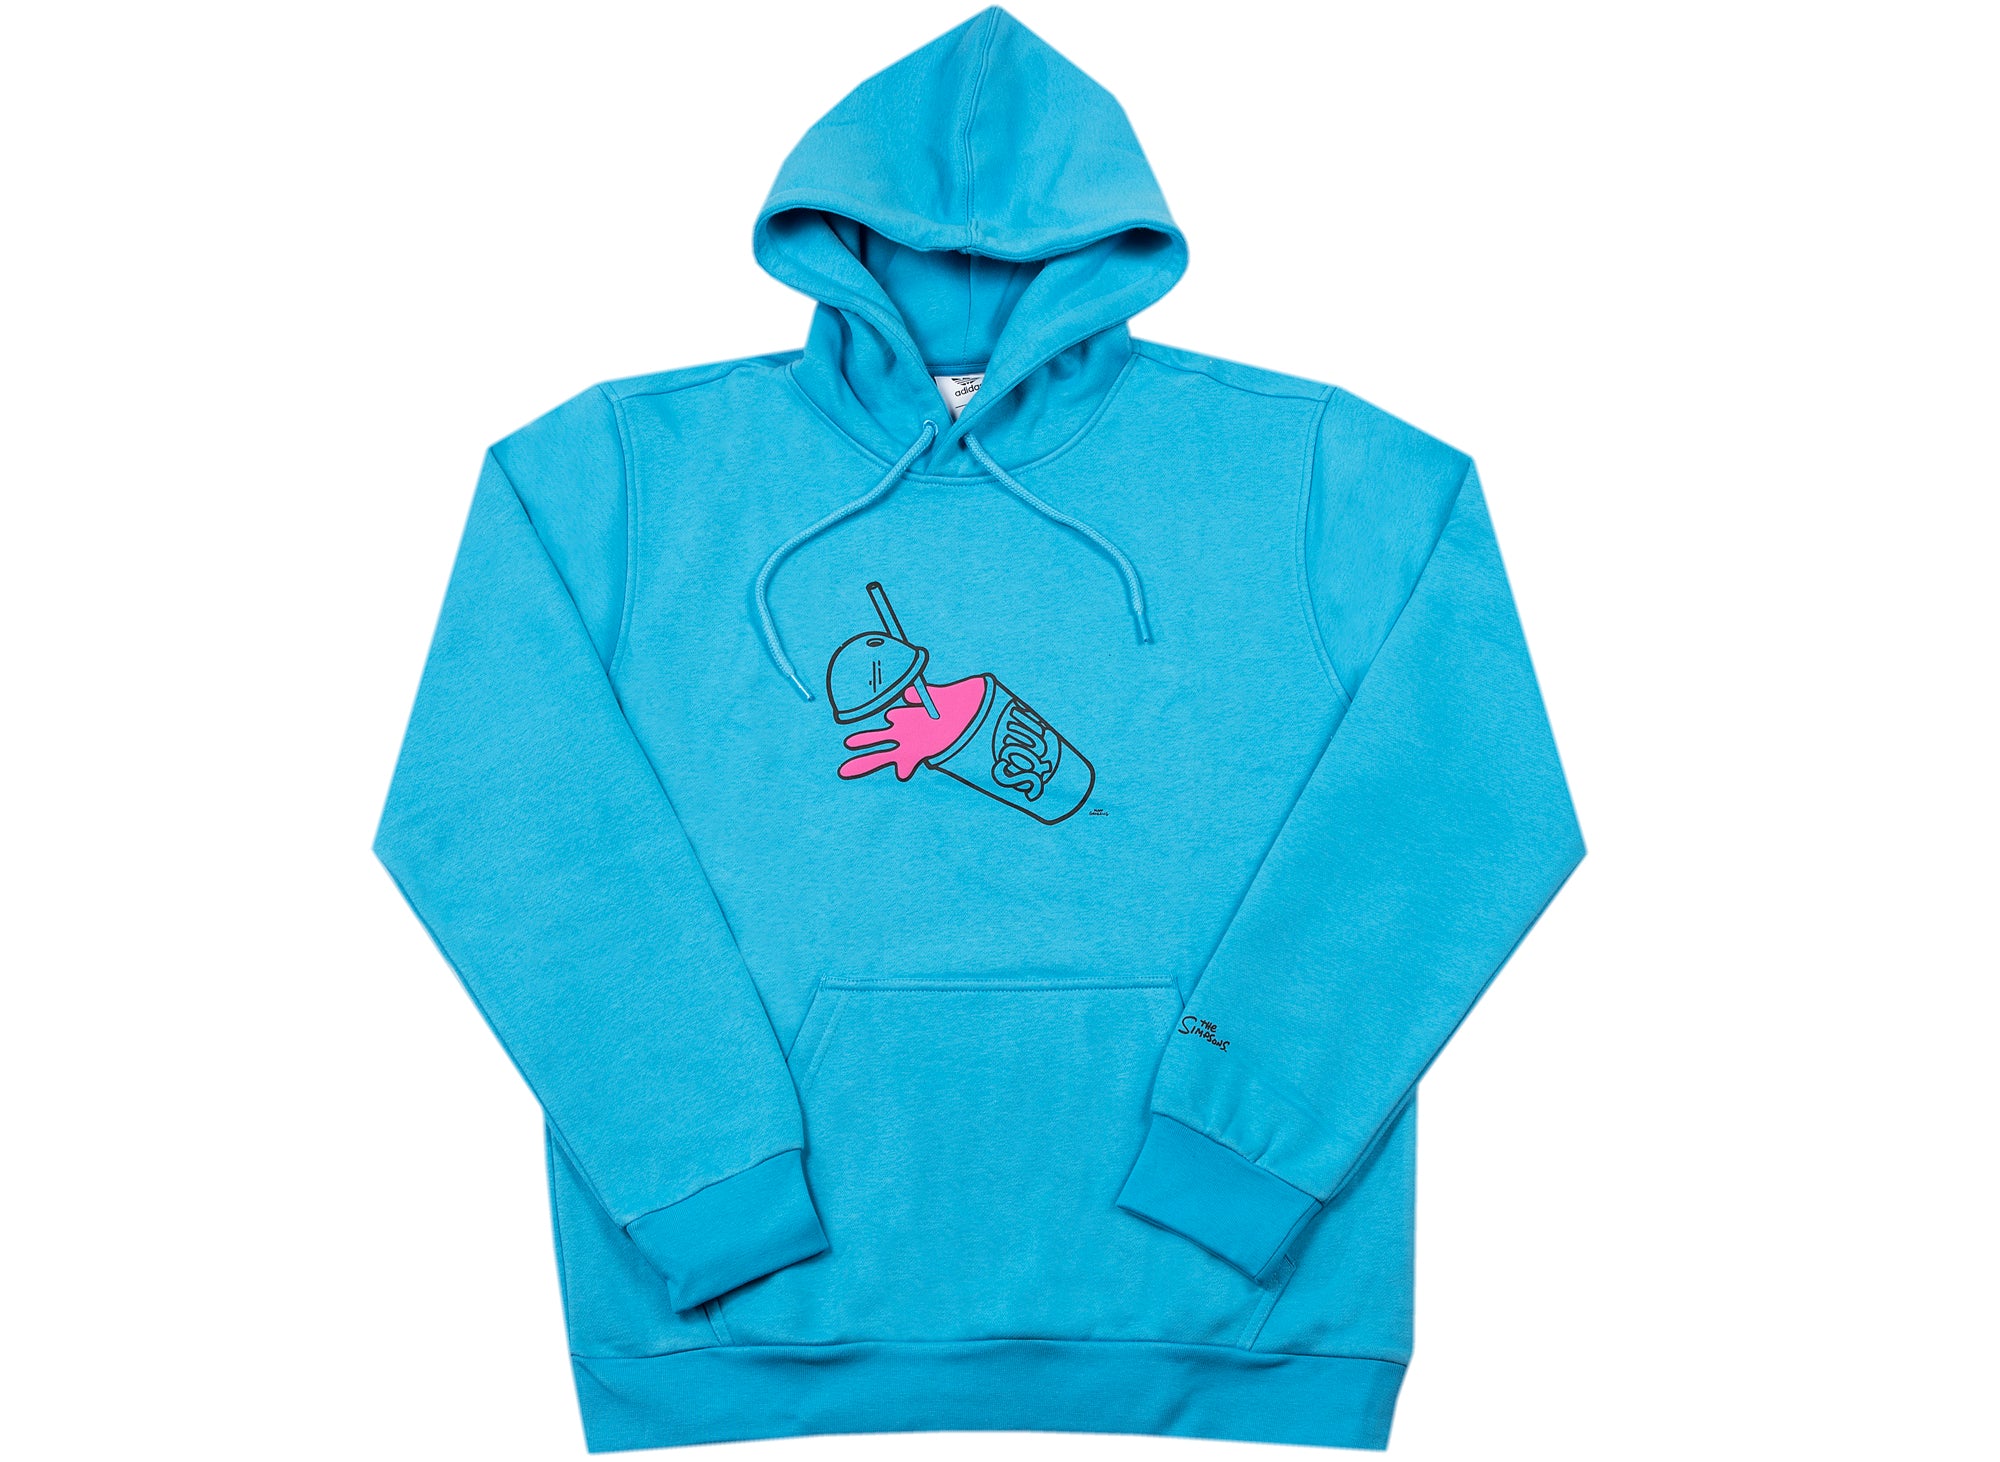 Novelista Herencia Red de comunicacion Adidas x The Simpsons Squishee Hoodie in Blue – Oneness Boutique